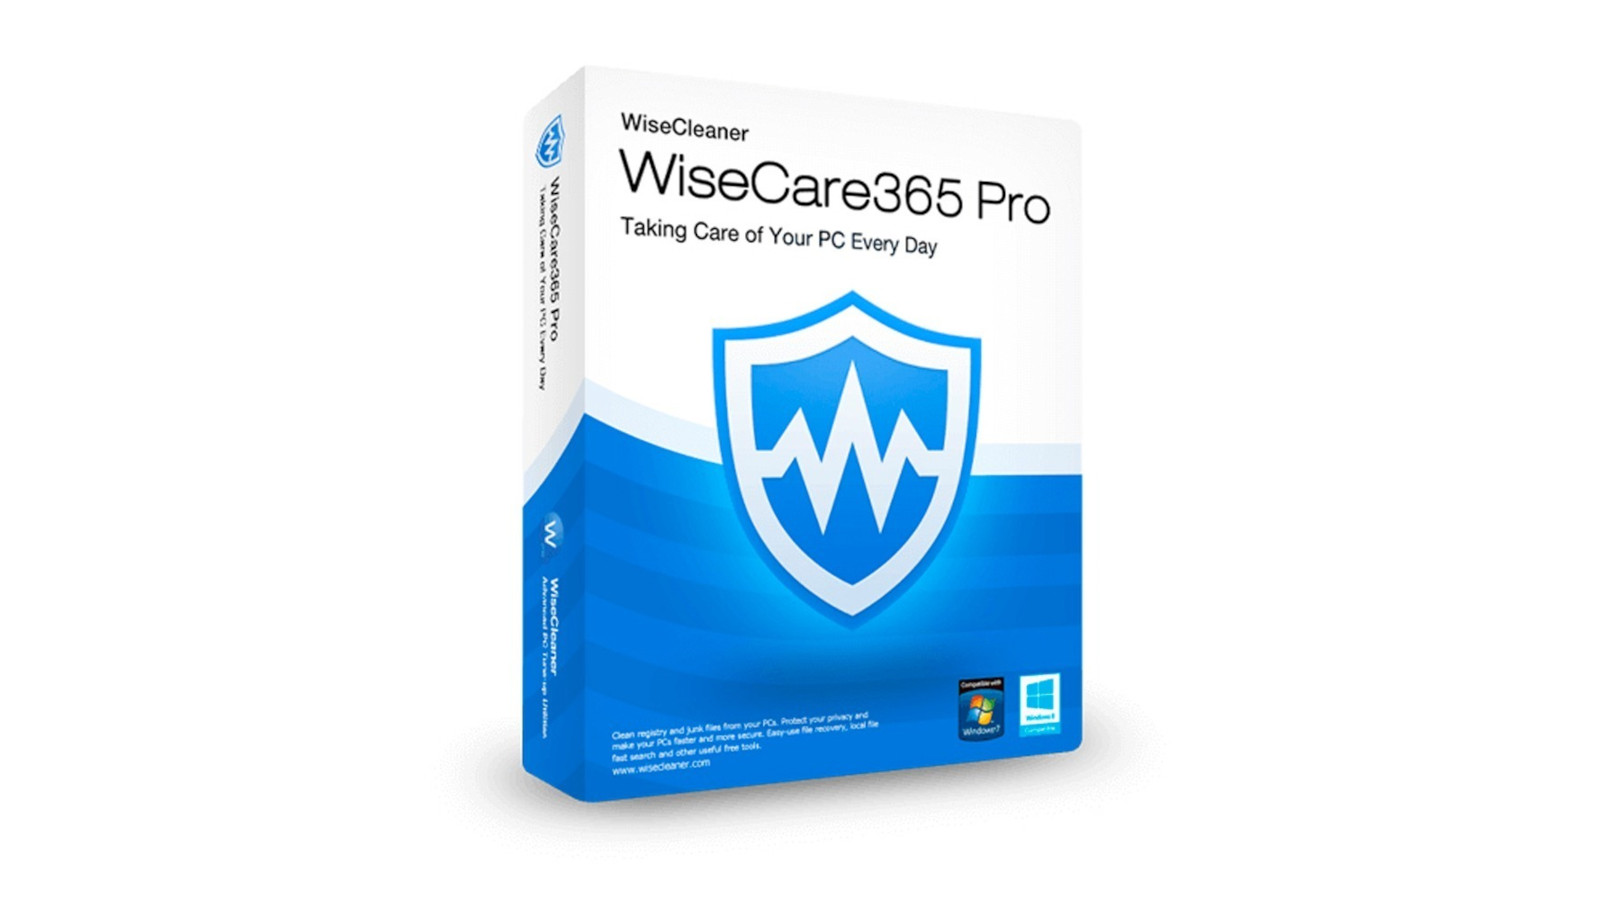 Wise Care 365 PRO CD Key (1 Year / 1 PC) $18.05